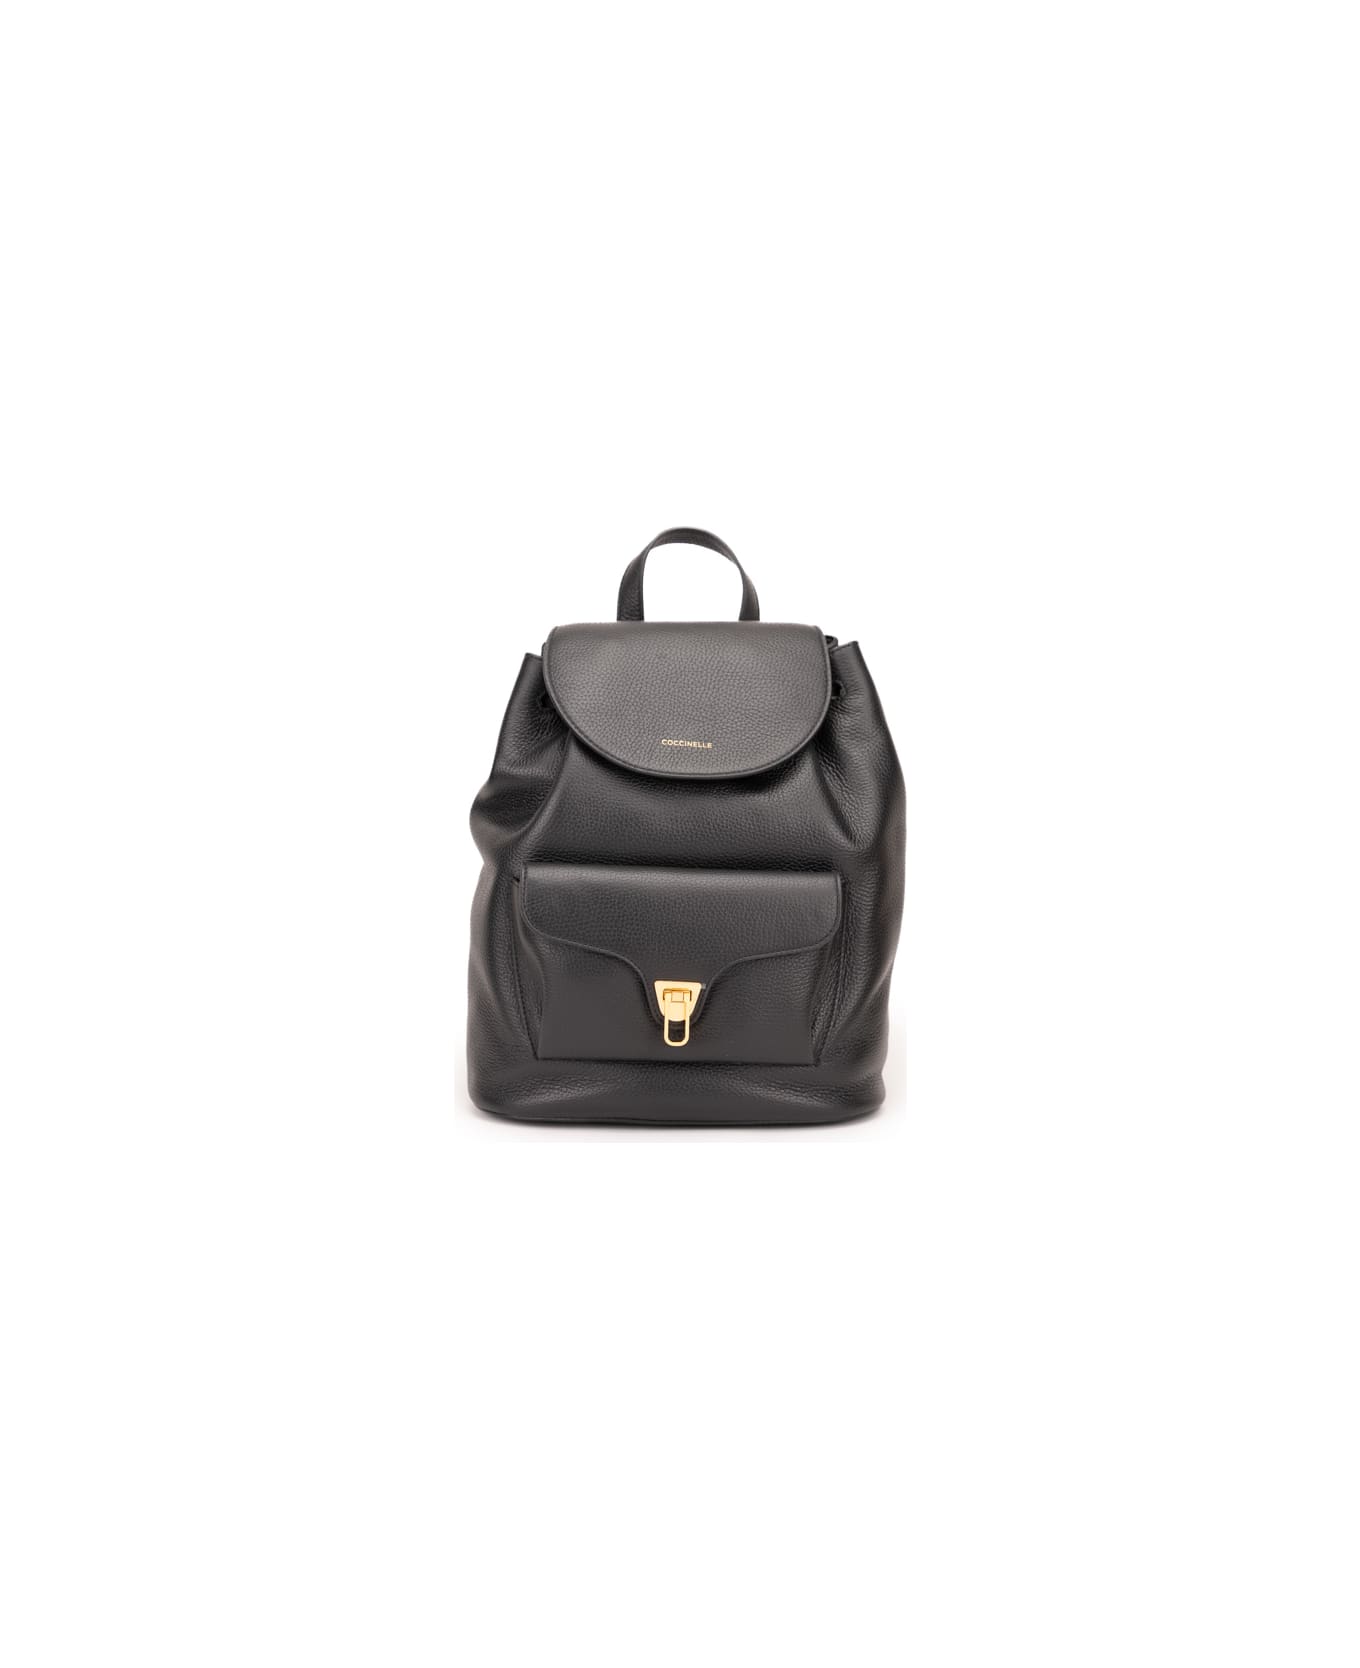 Coccinelle Hammered Leather Backpack - Noir